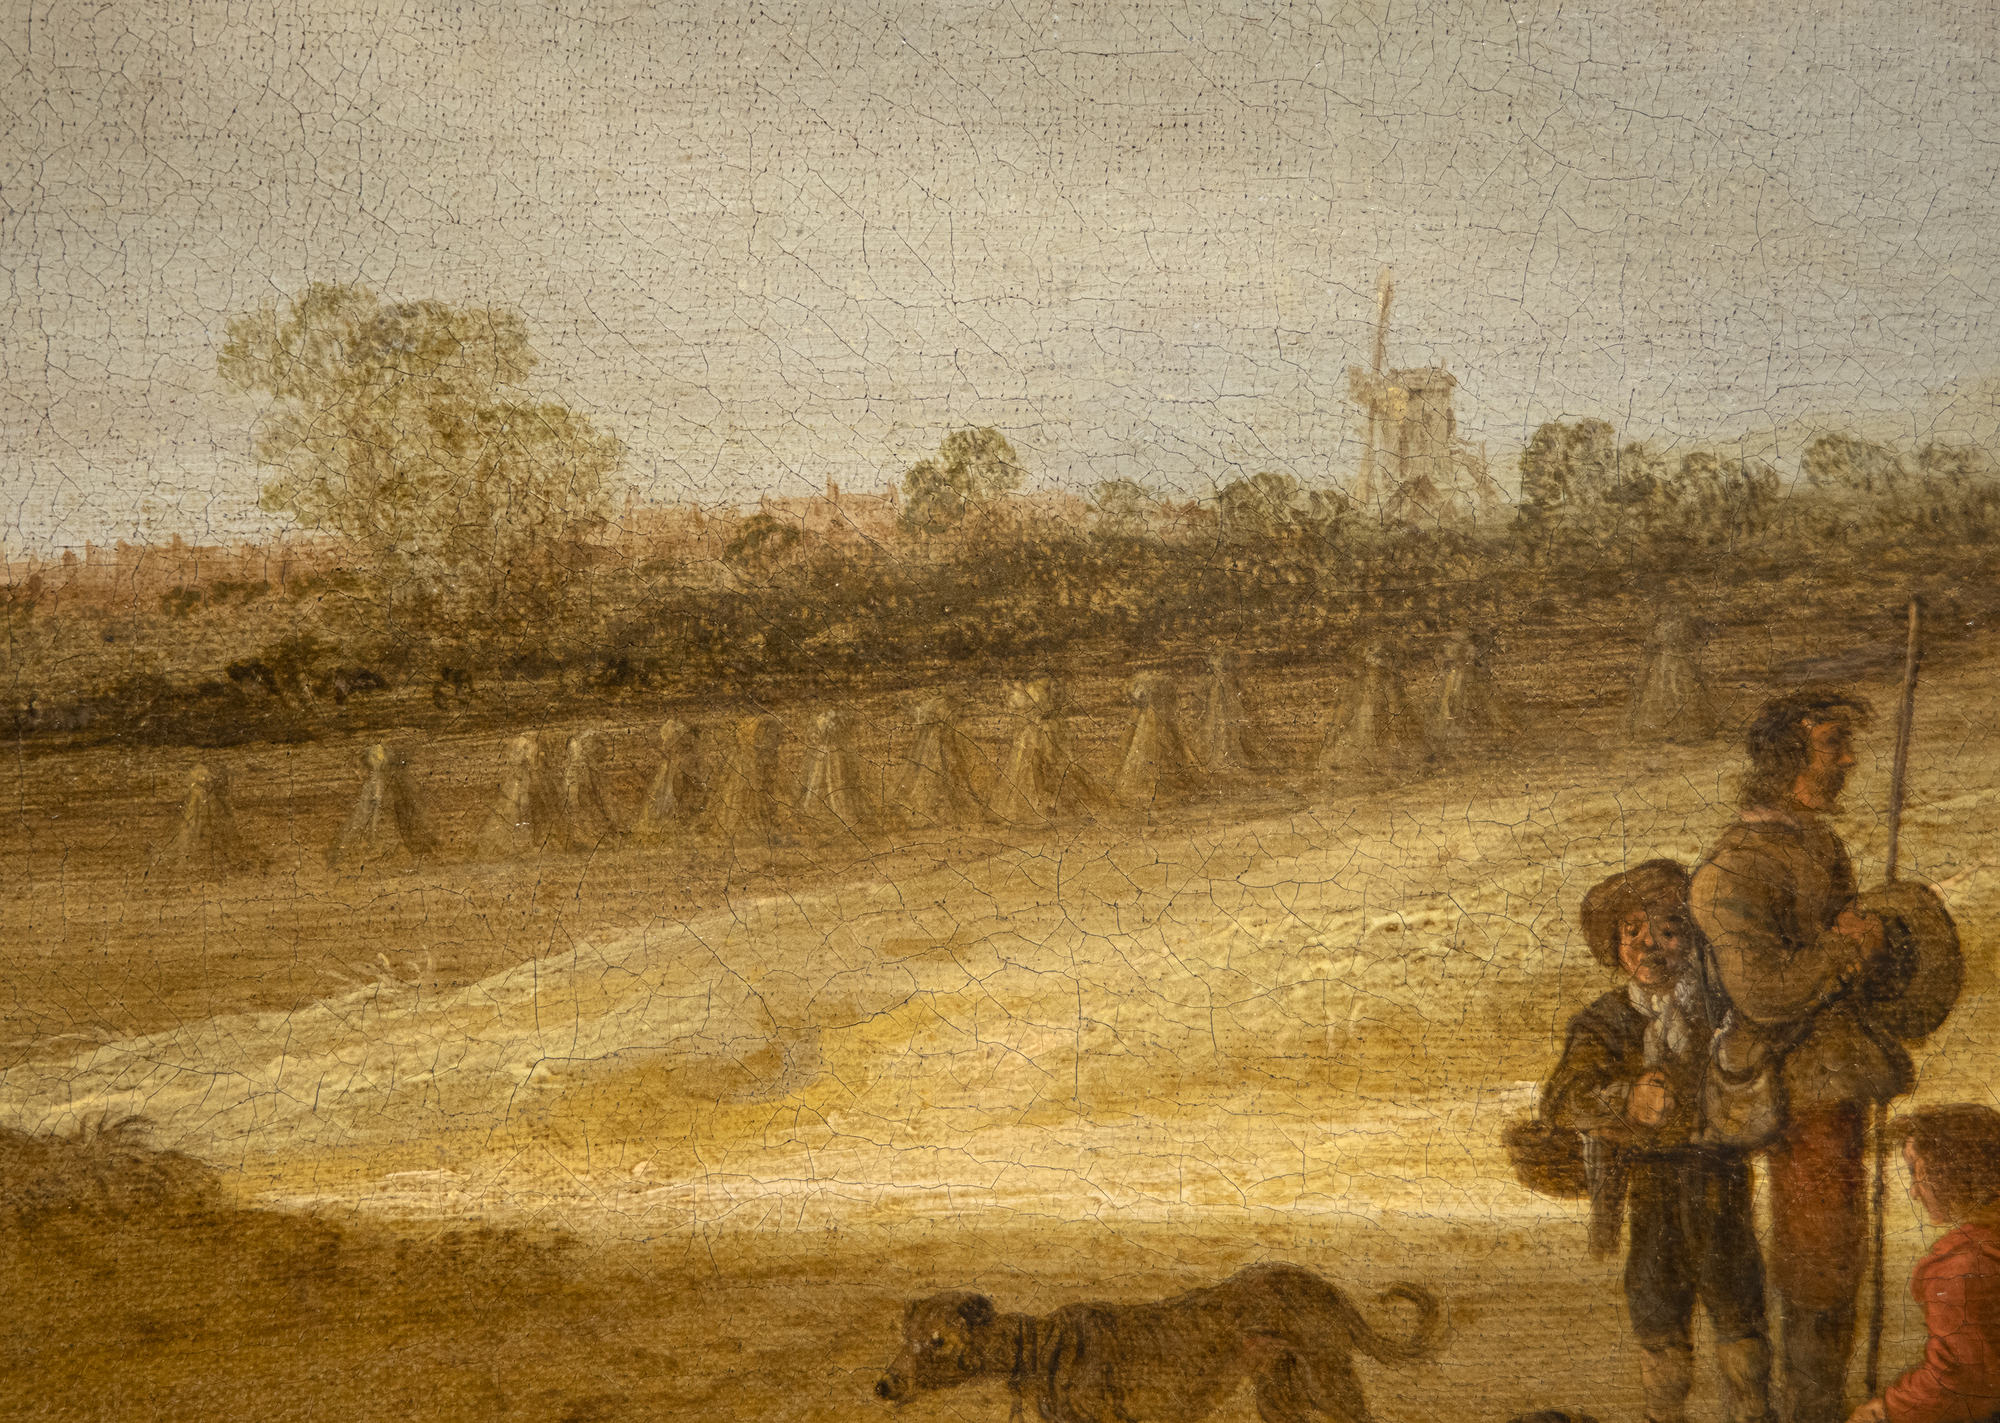 SALOMON VAN RUYSDAEL - A Dune Landscape with Figures Resting and a Couple on Horseback, a View of Nijmegen Cathedral Beyond - oil on canvas - 26 1/2 x 41 1/2 in.